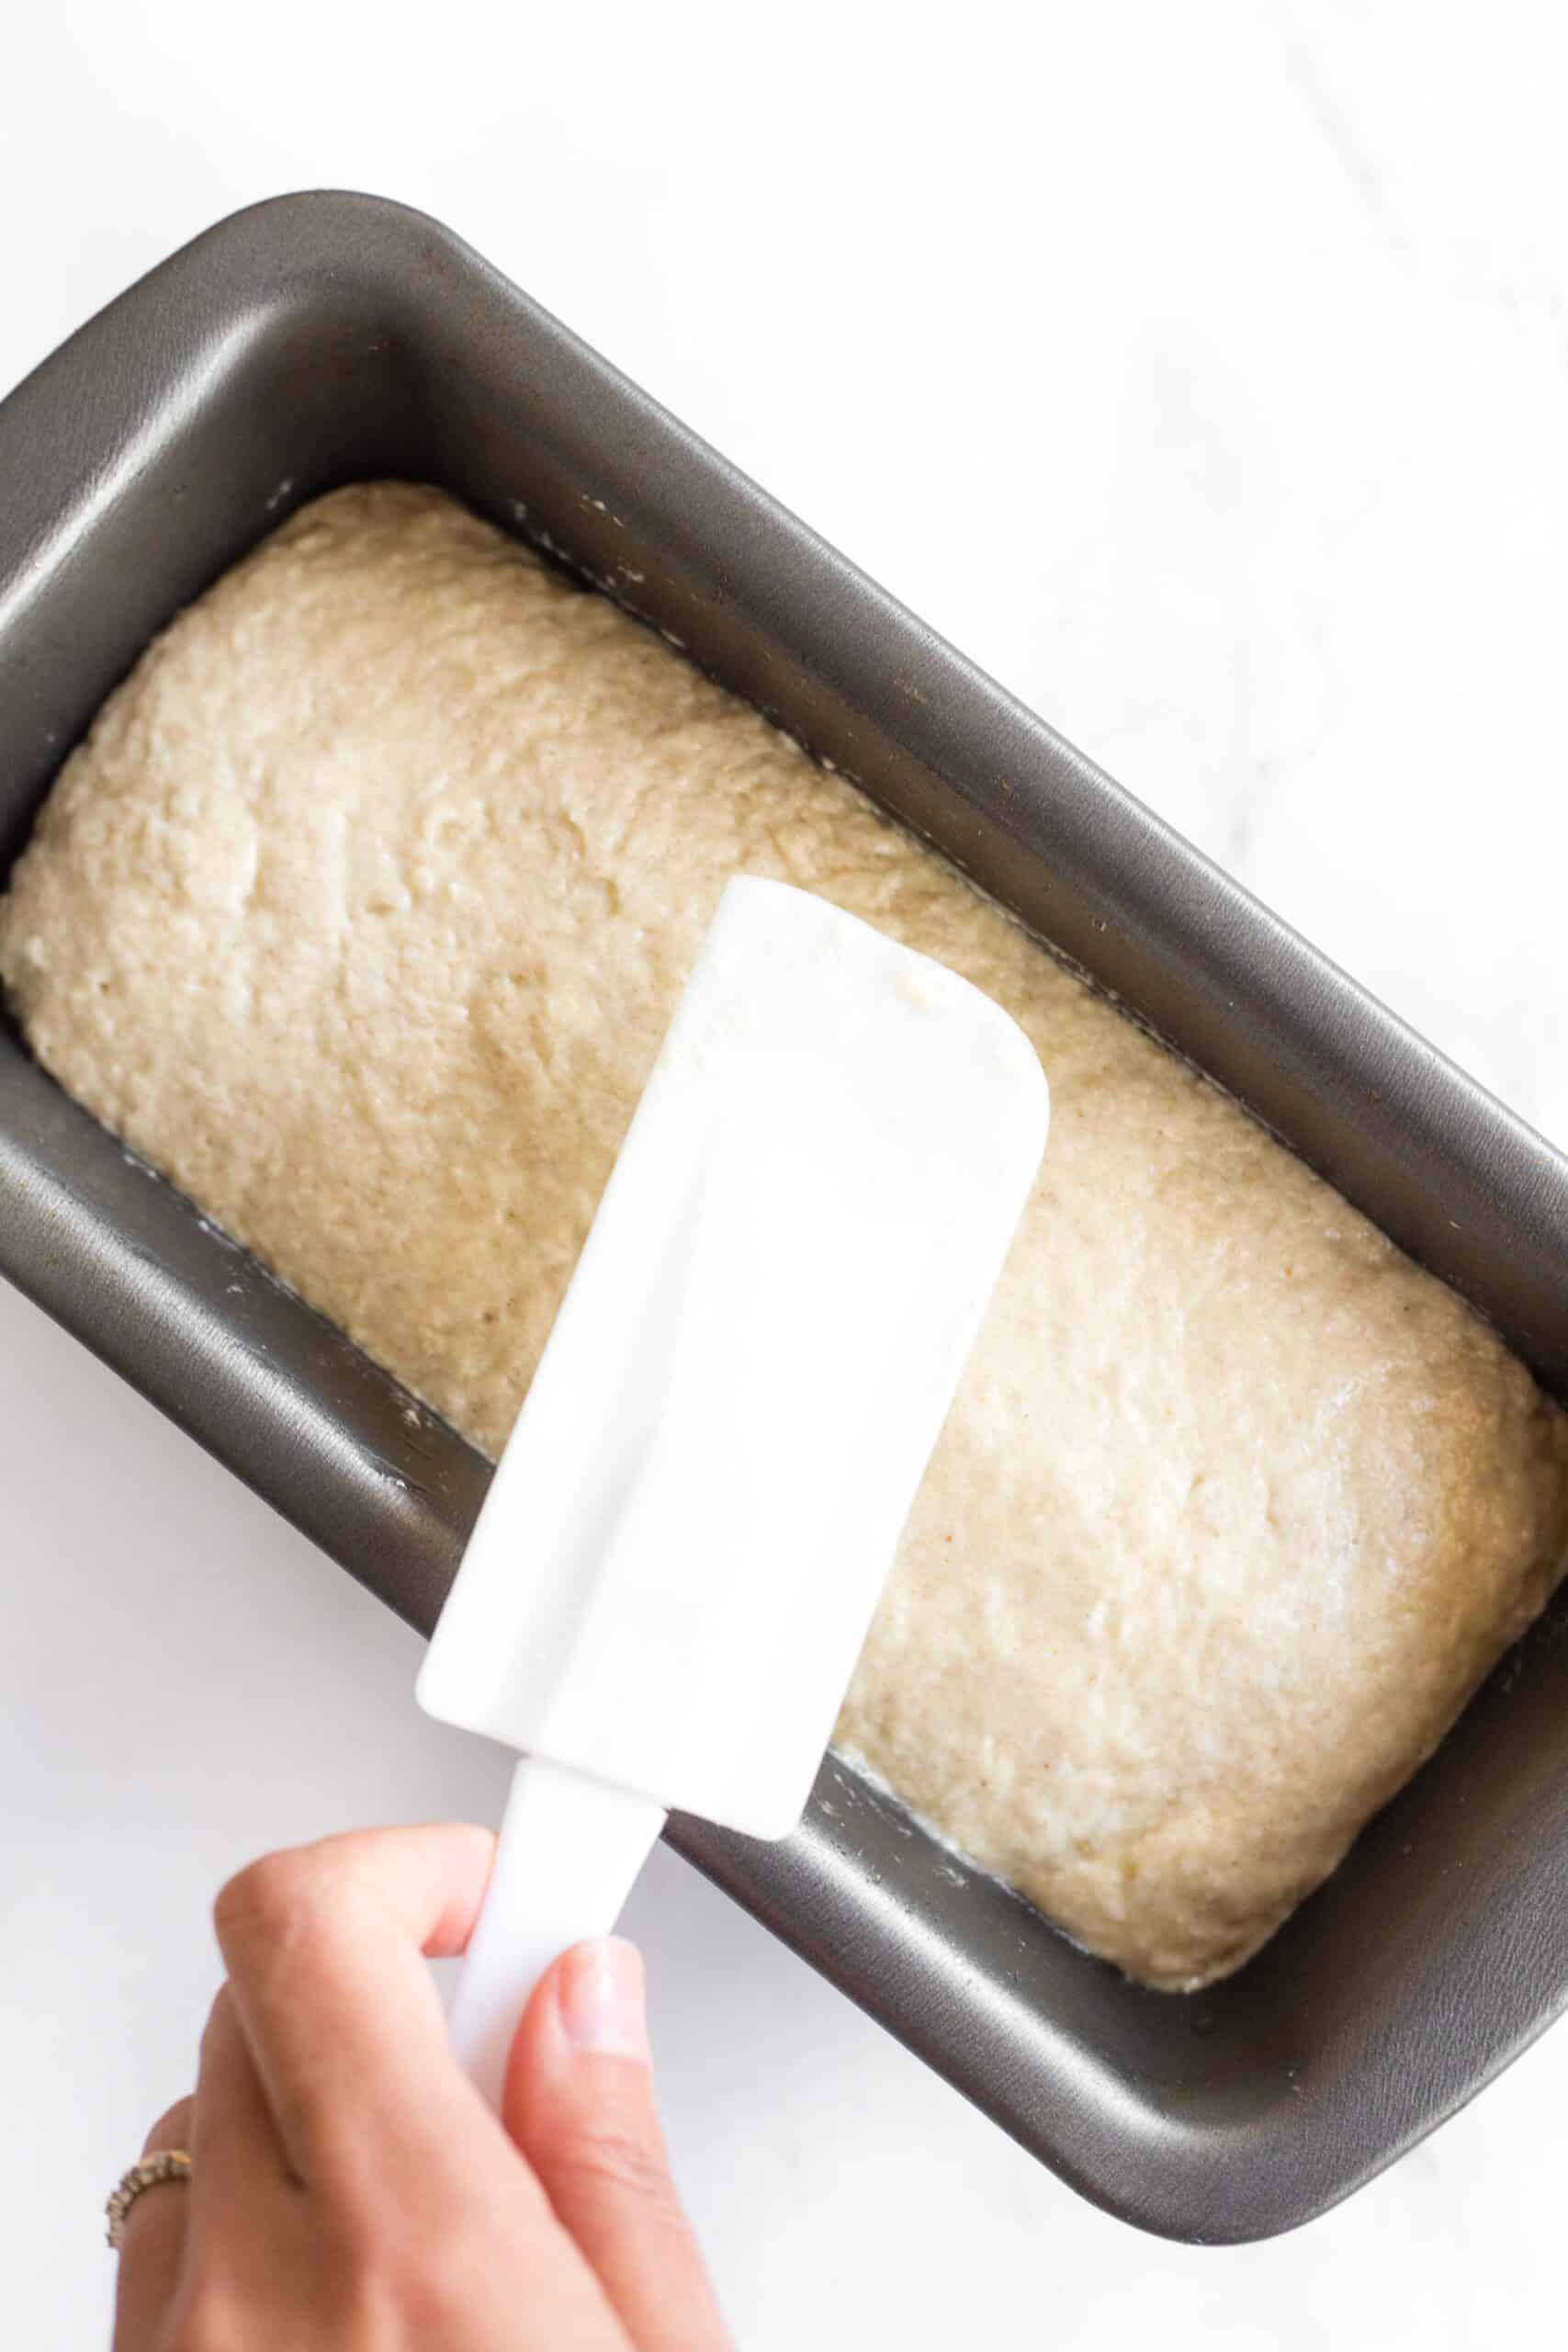 Using a wet spatula to smooth out the top of bread dough in loaf pan.